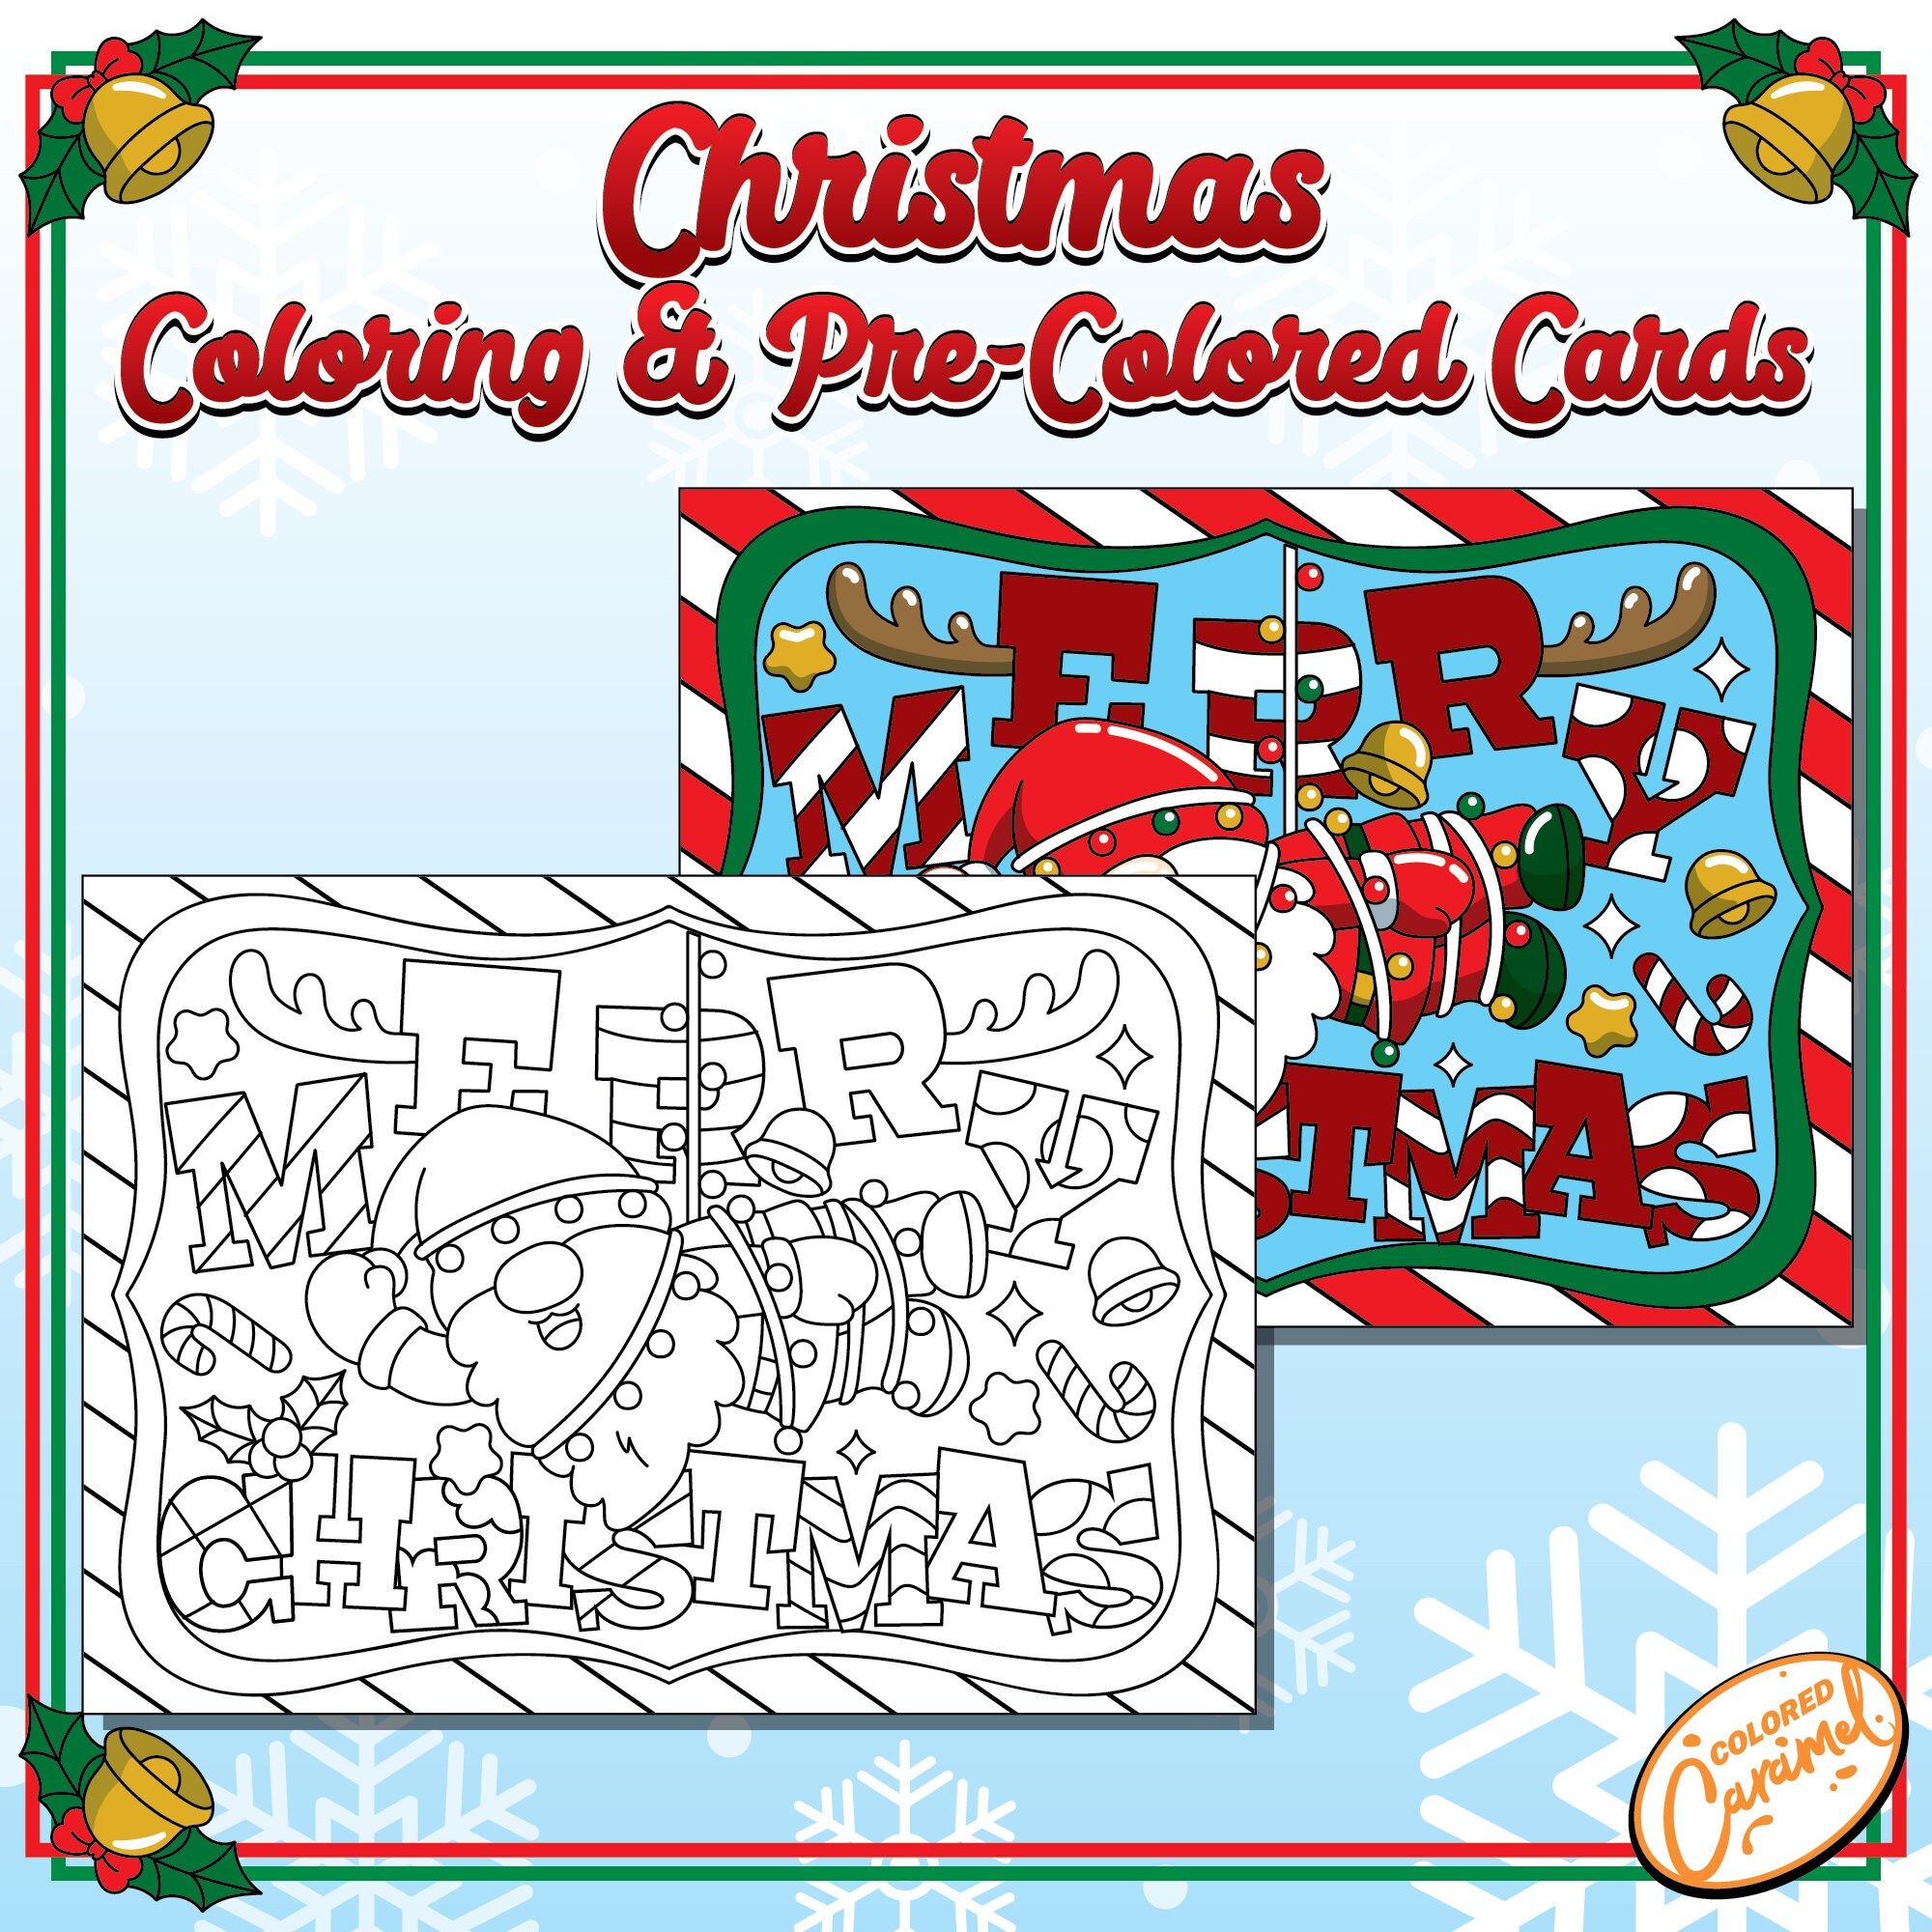 Christmas Gnomes Coloring Card, Colorable and Pre-colored Holiday Greeting Card, DIY Festive and Joyful Printable Instant Digital Download